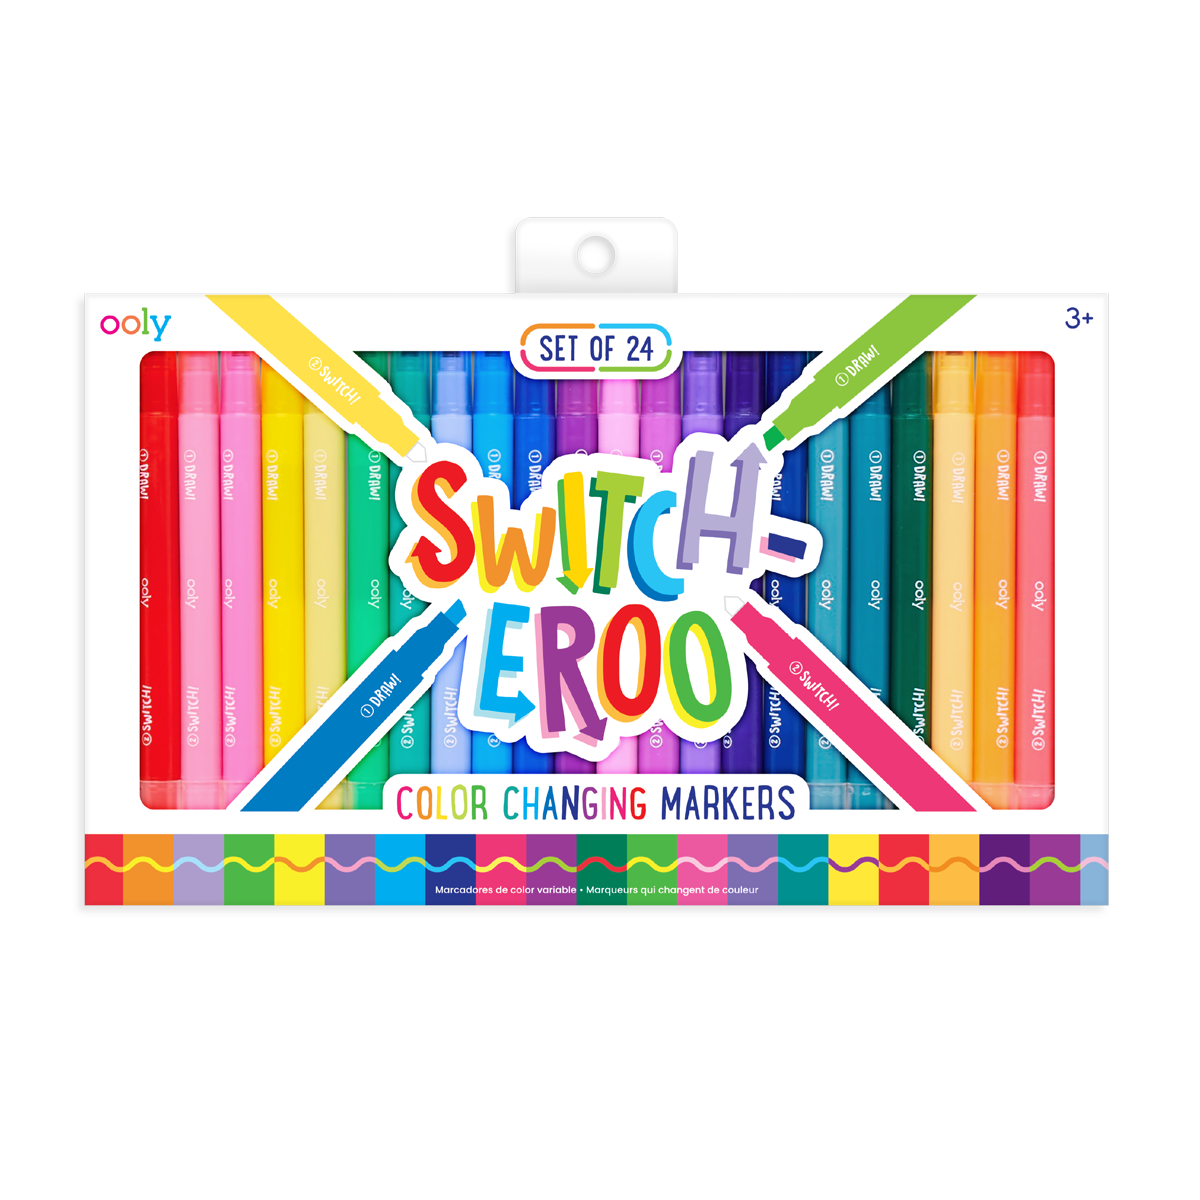 OOLY Switch-eroo Color Changing Markers  in packaging